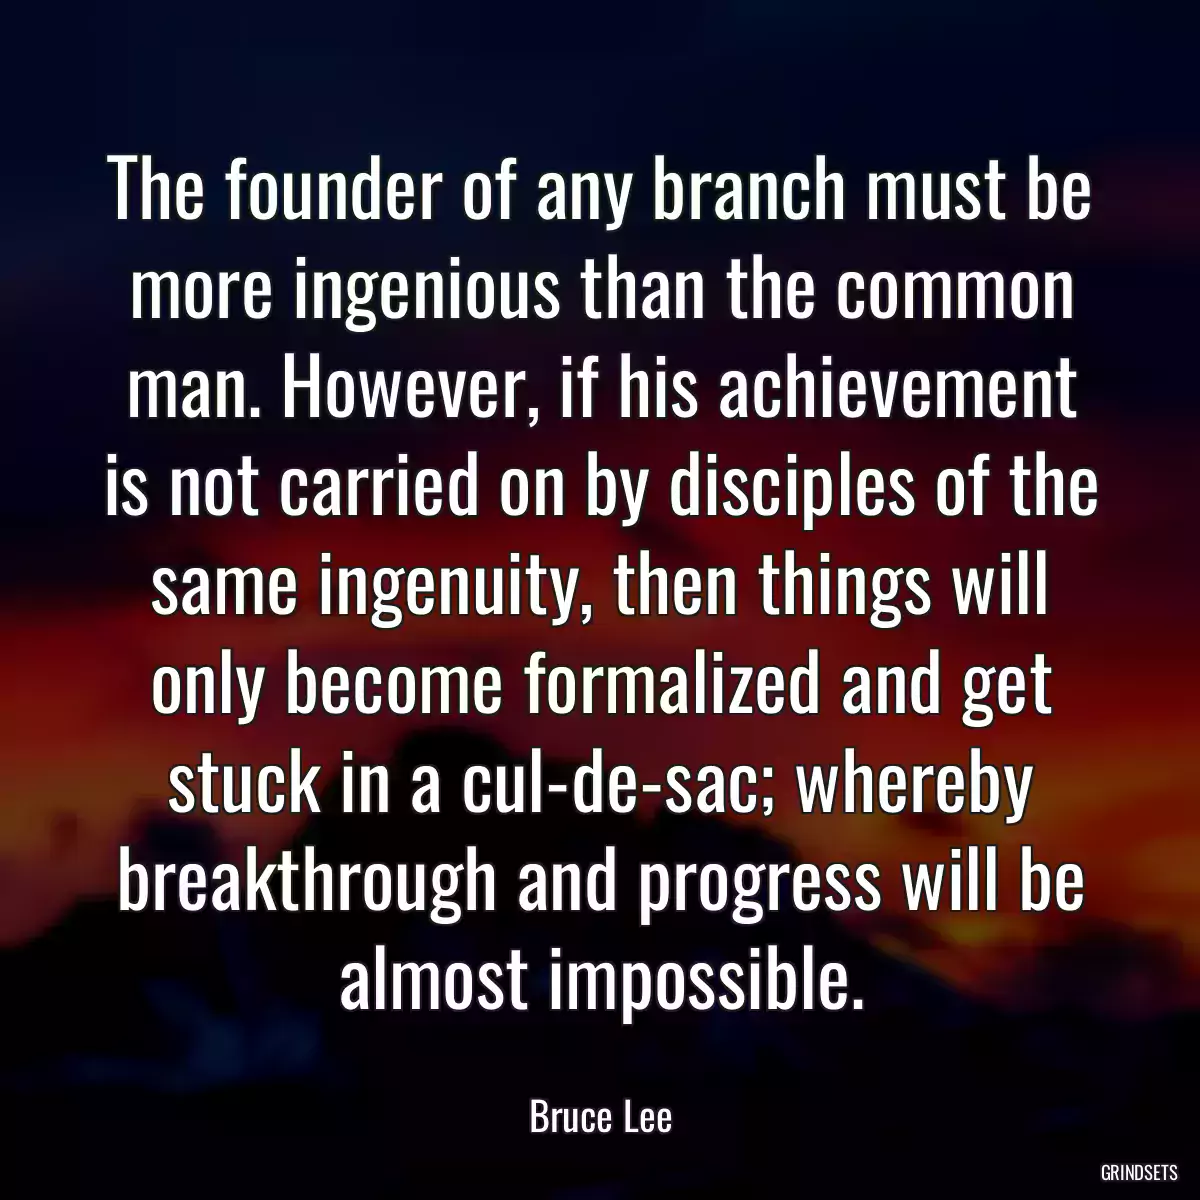 The founder of any branch must be more ingenious than the common man. However, if his achievement is not carried on by disciples of the same ingenuity, then things will only become formalized and get stuck in a cul-de-sac; whereby breakthrough and progress will be almost impossible.